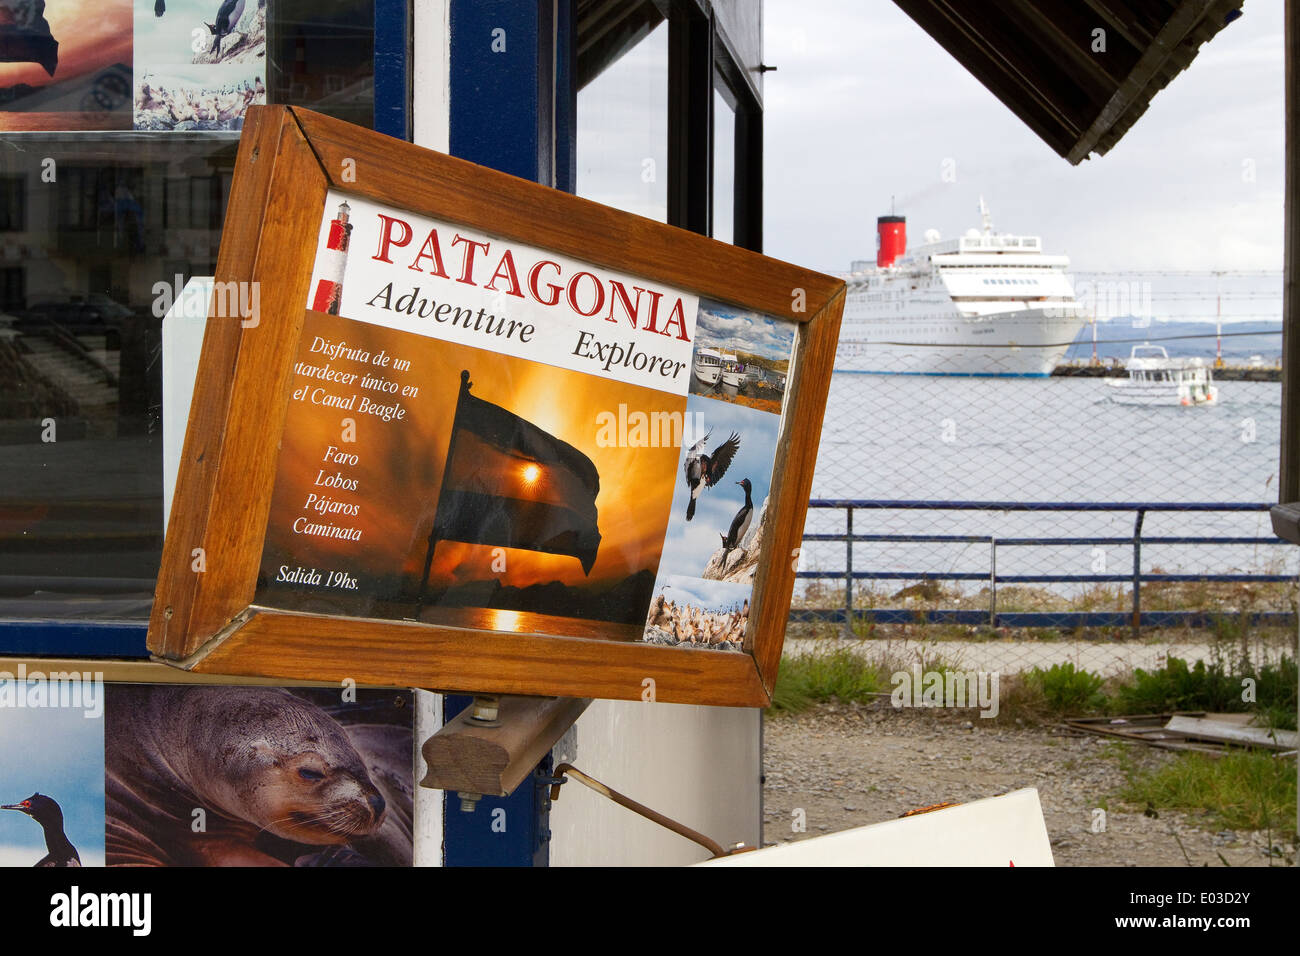 Patagonia adventure travel sign with cruise ship in background preparing to leave Ushuaia for tour of Antarctica. Stock Photo